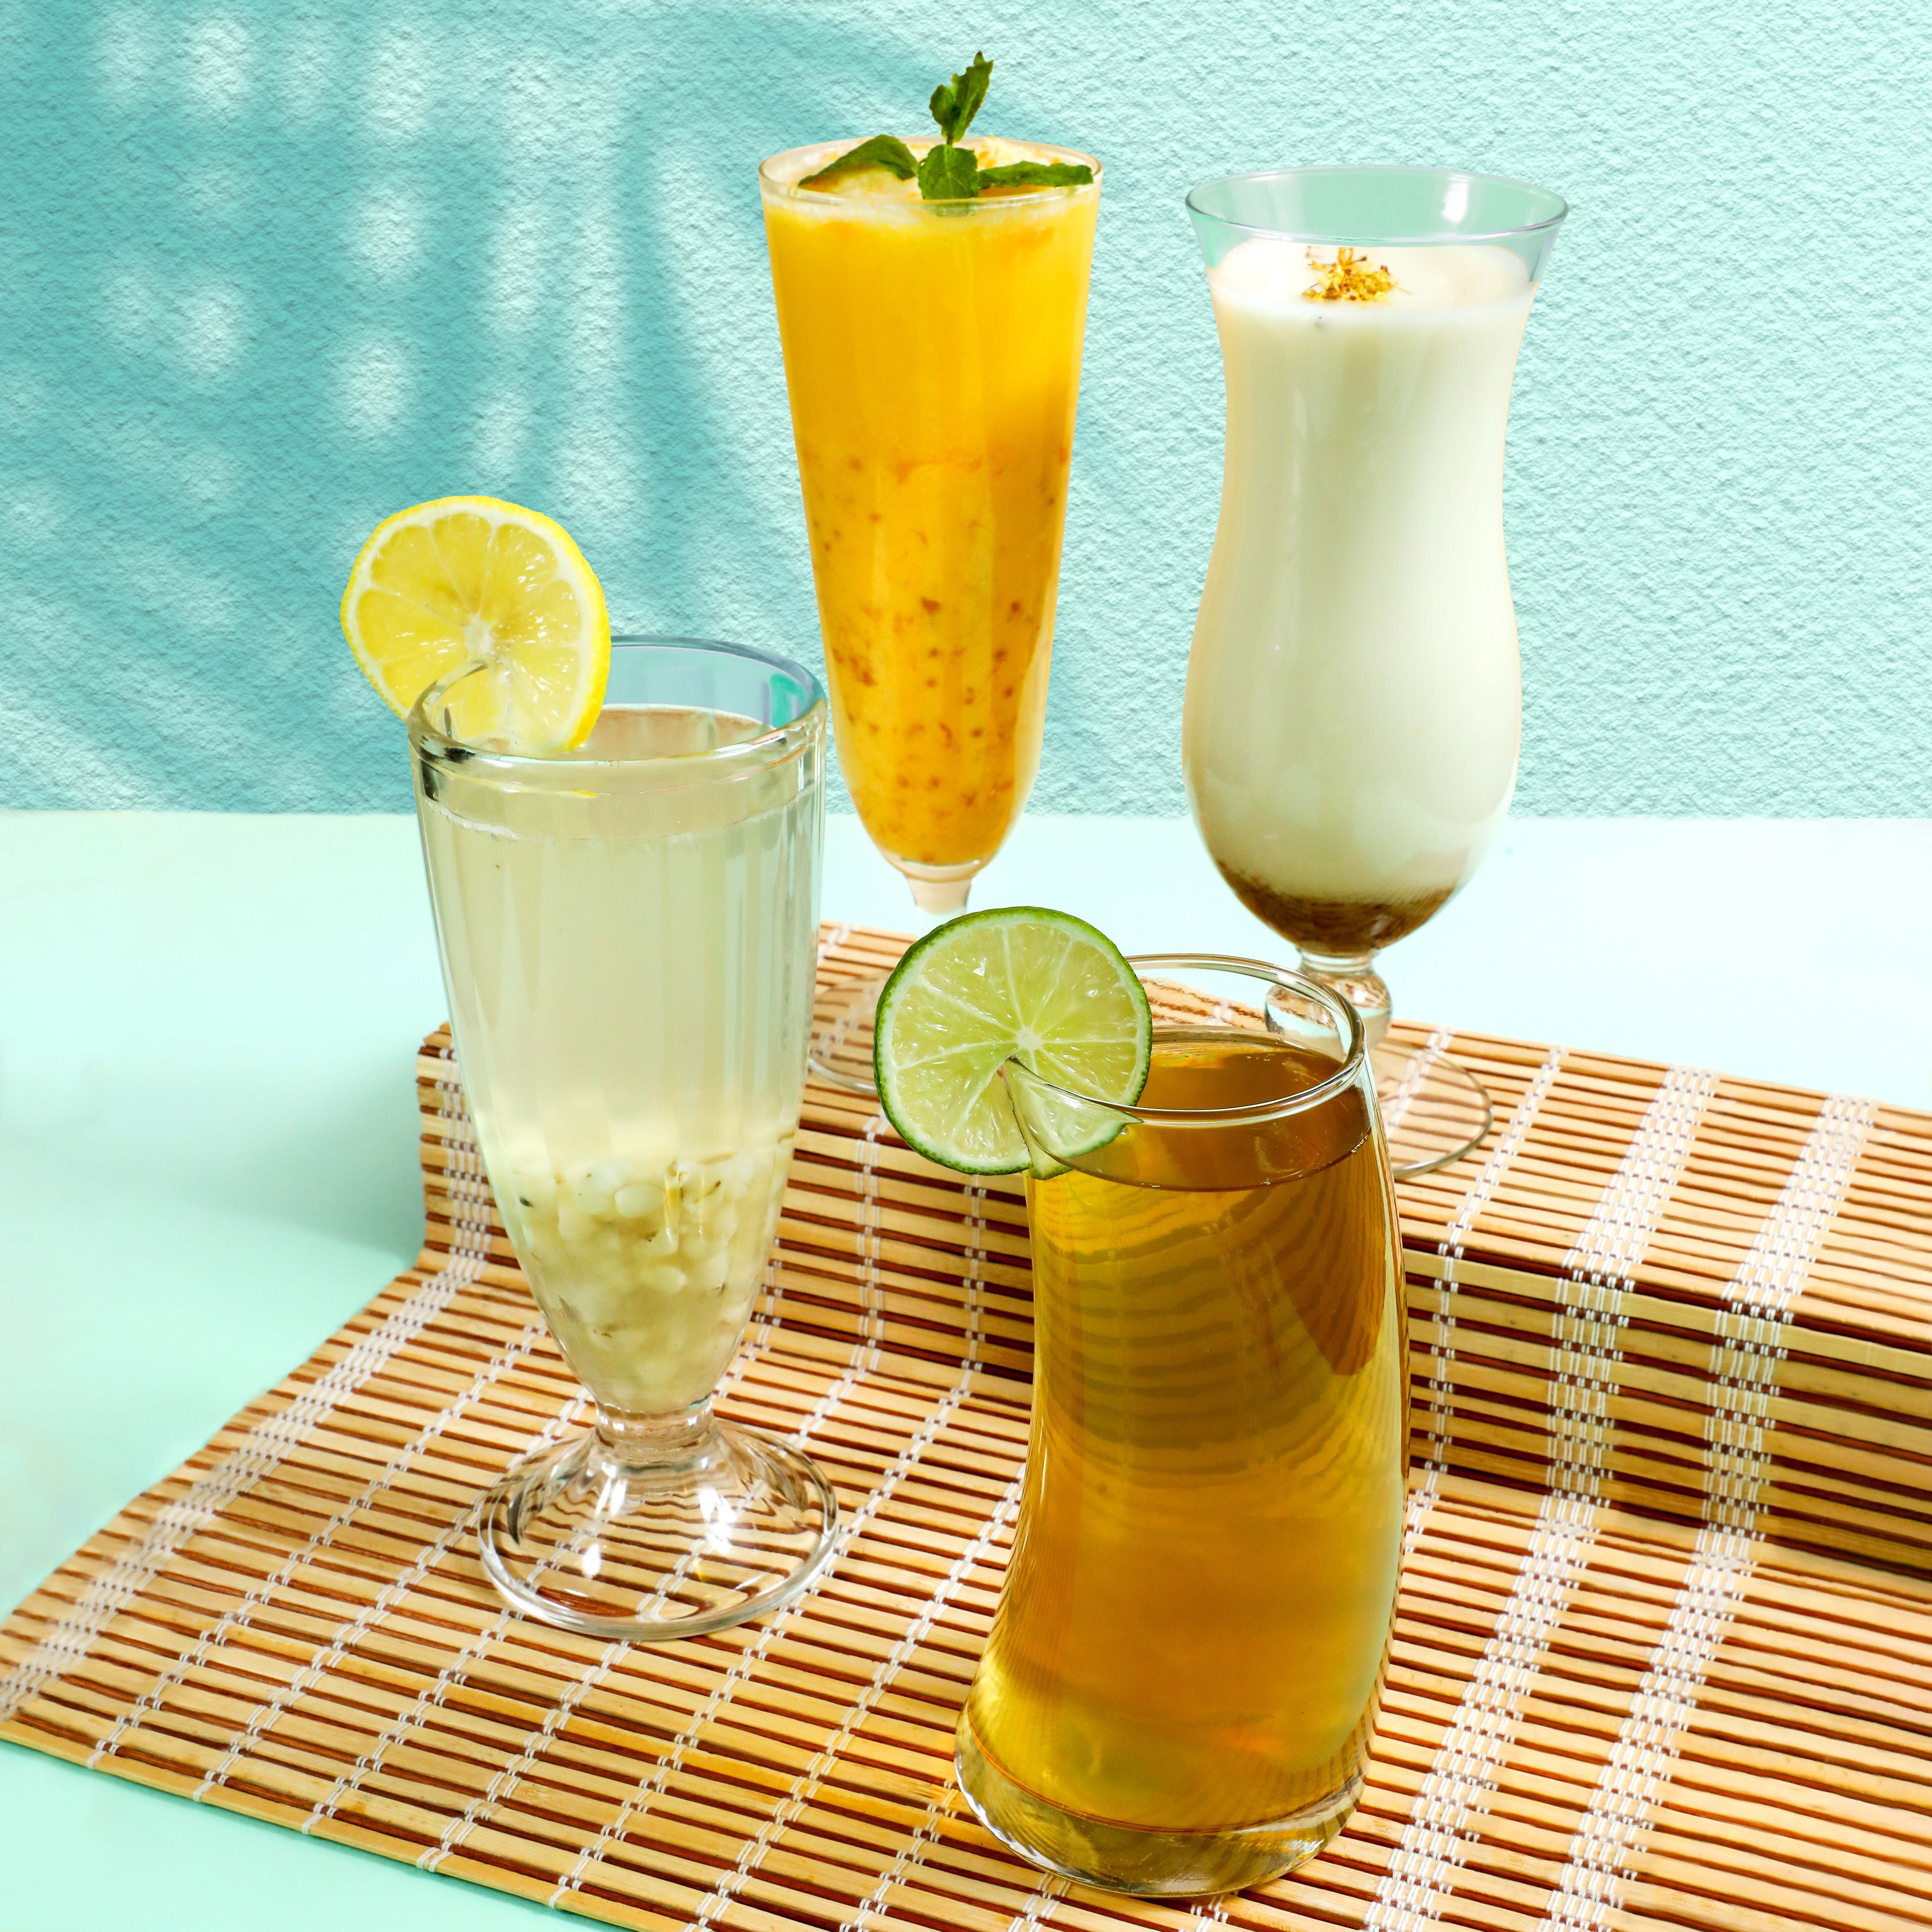 Beat the heat with our Summer Drinks